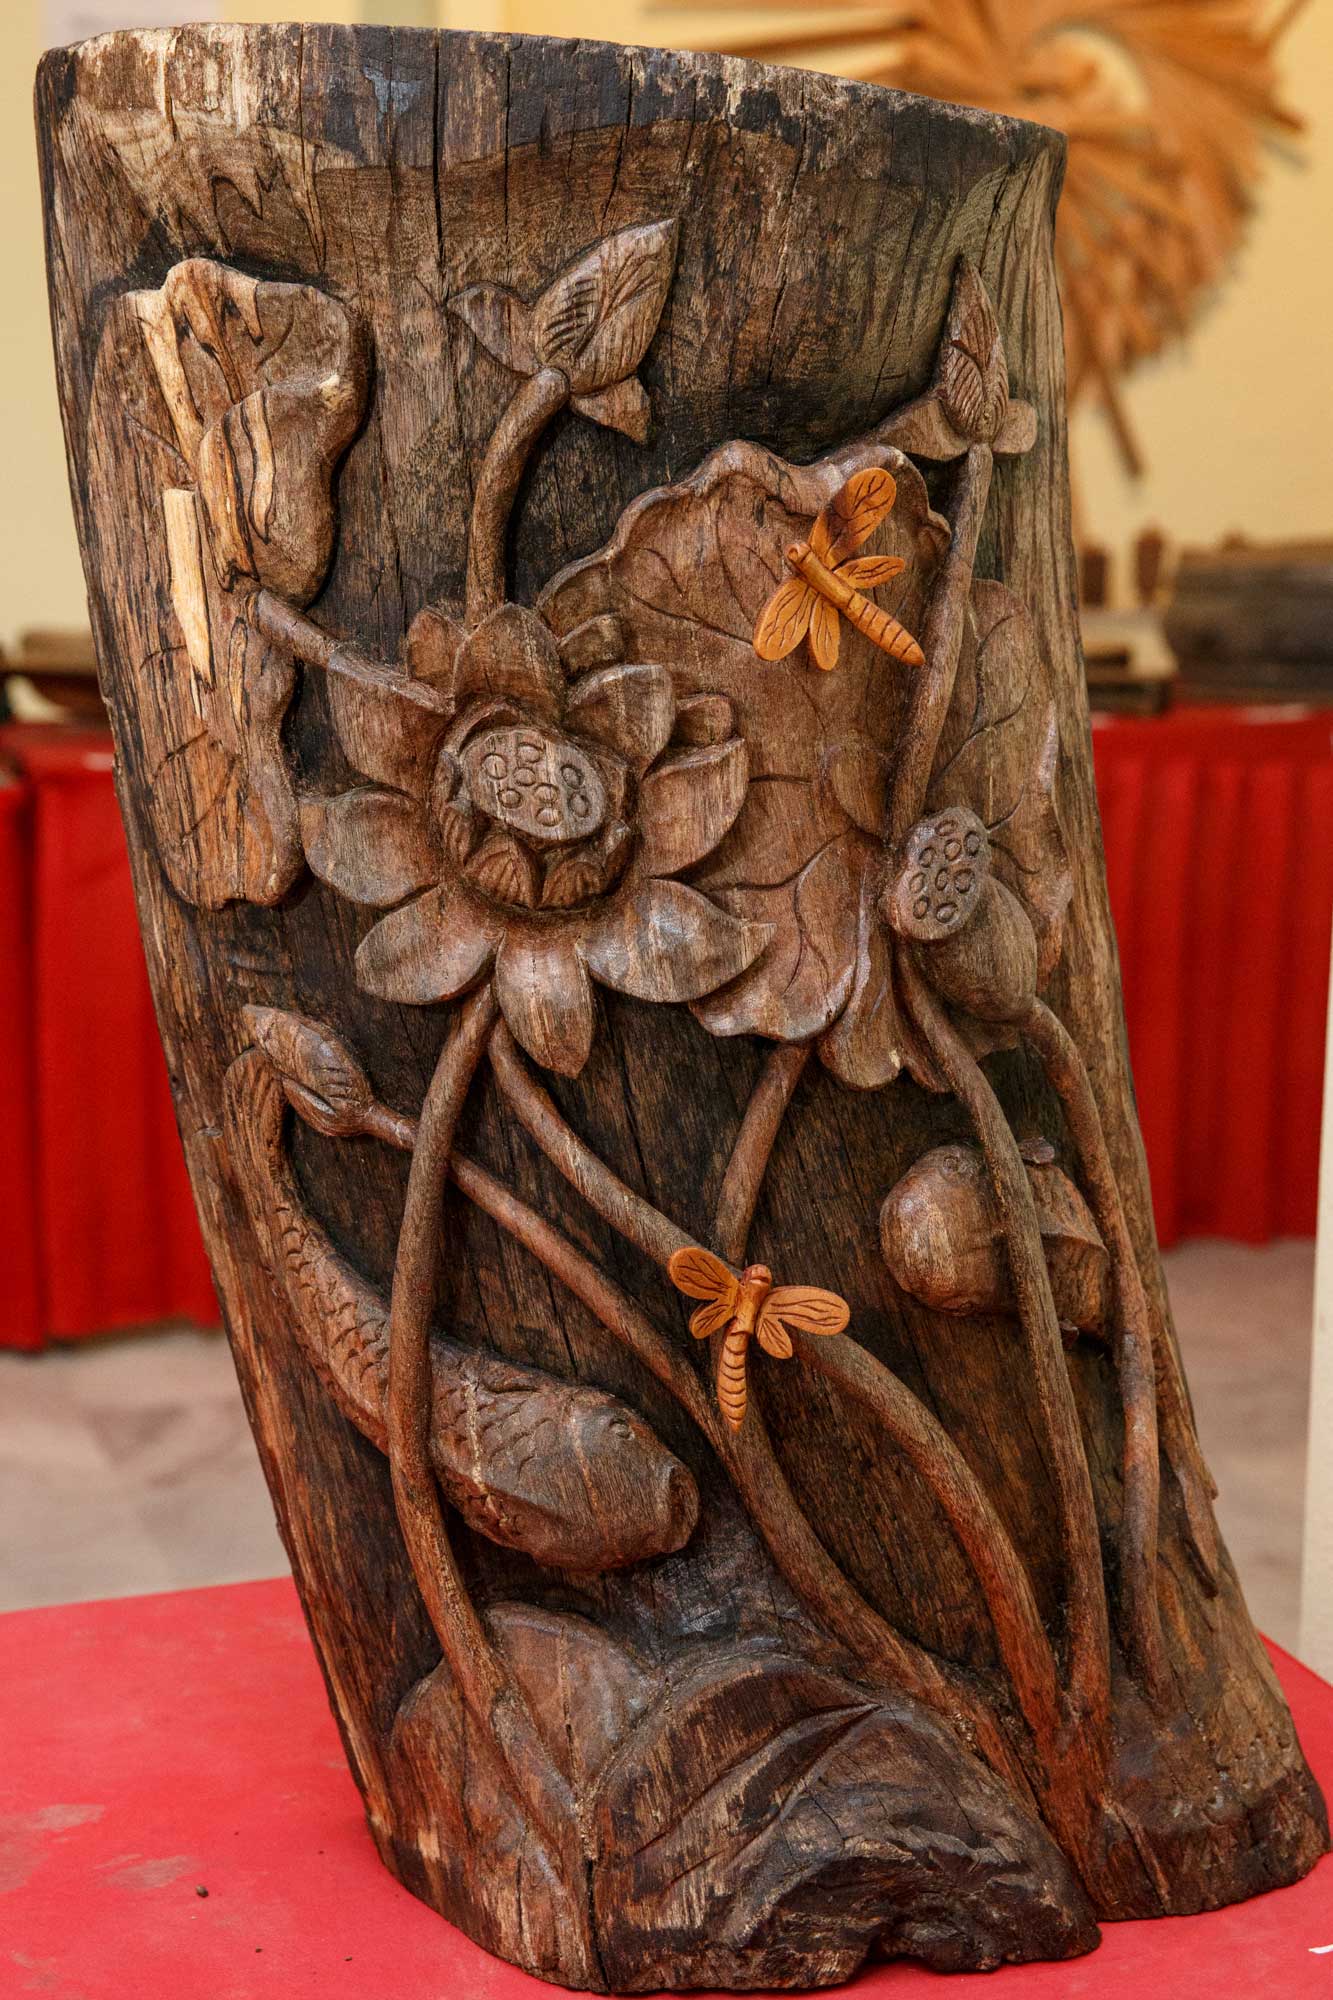 2016 WWD, woodcarving show, works